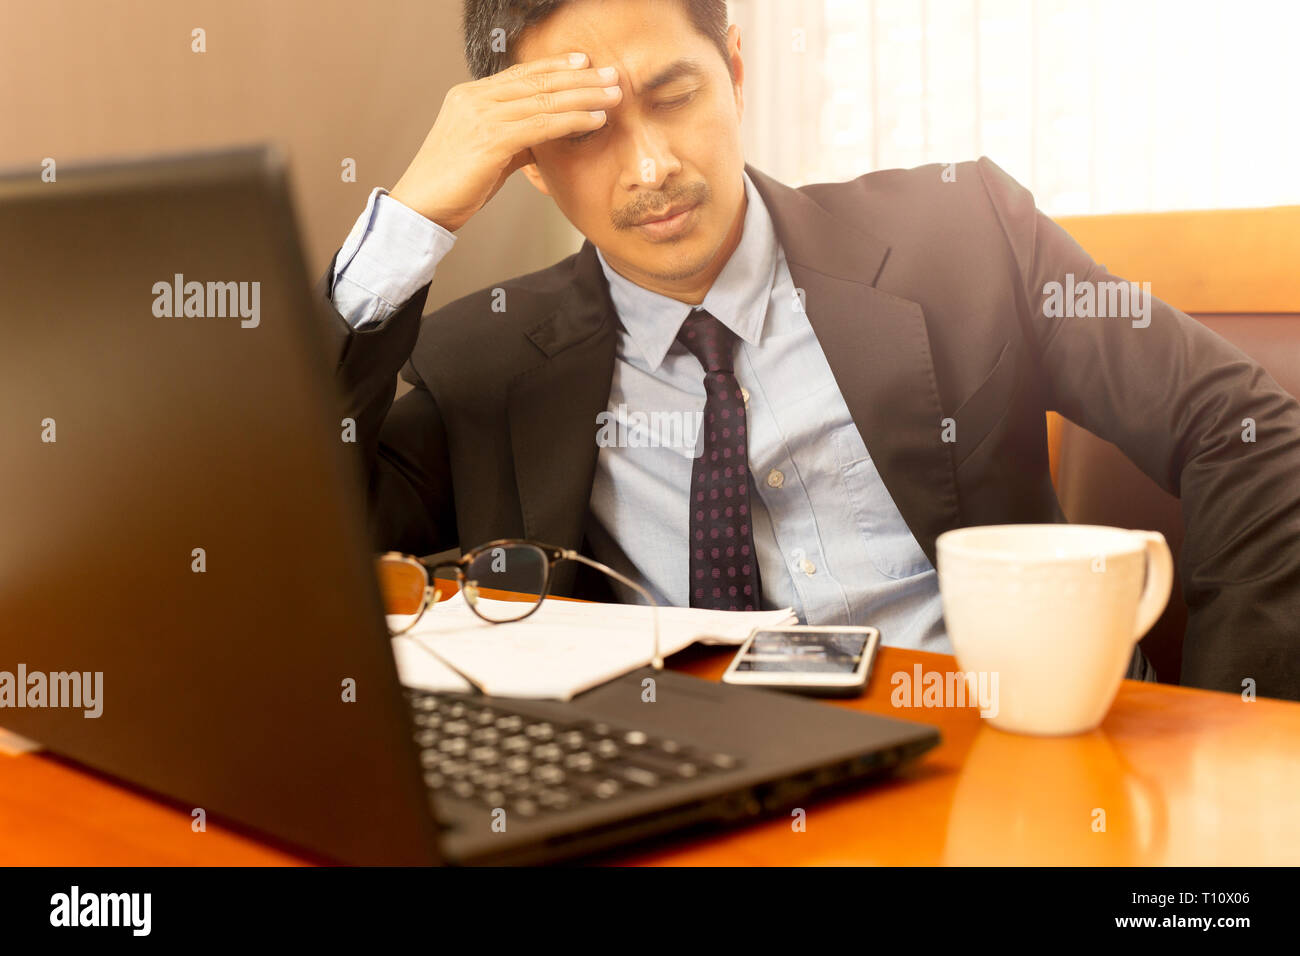 Businessman leaning with hand on his head on eyes closed feeling sleepy. Stock Photo